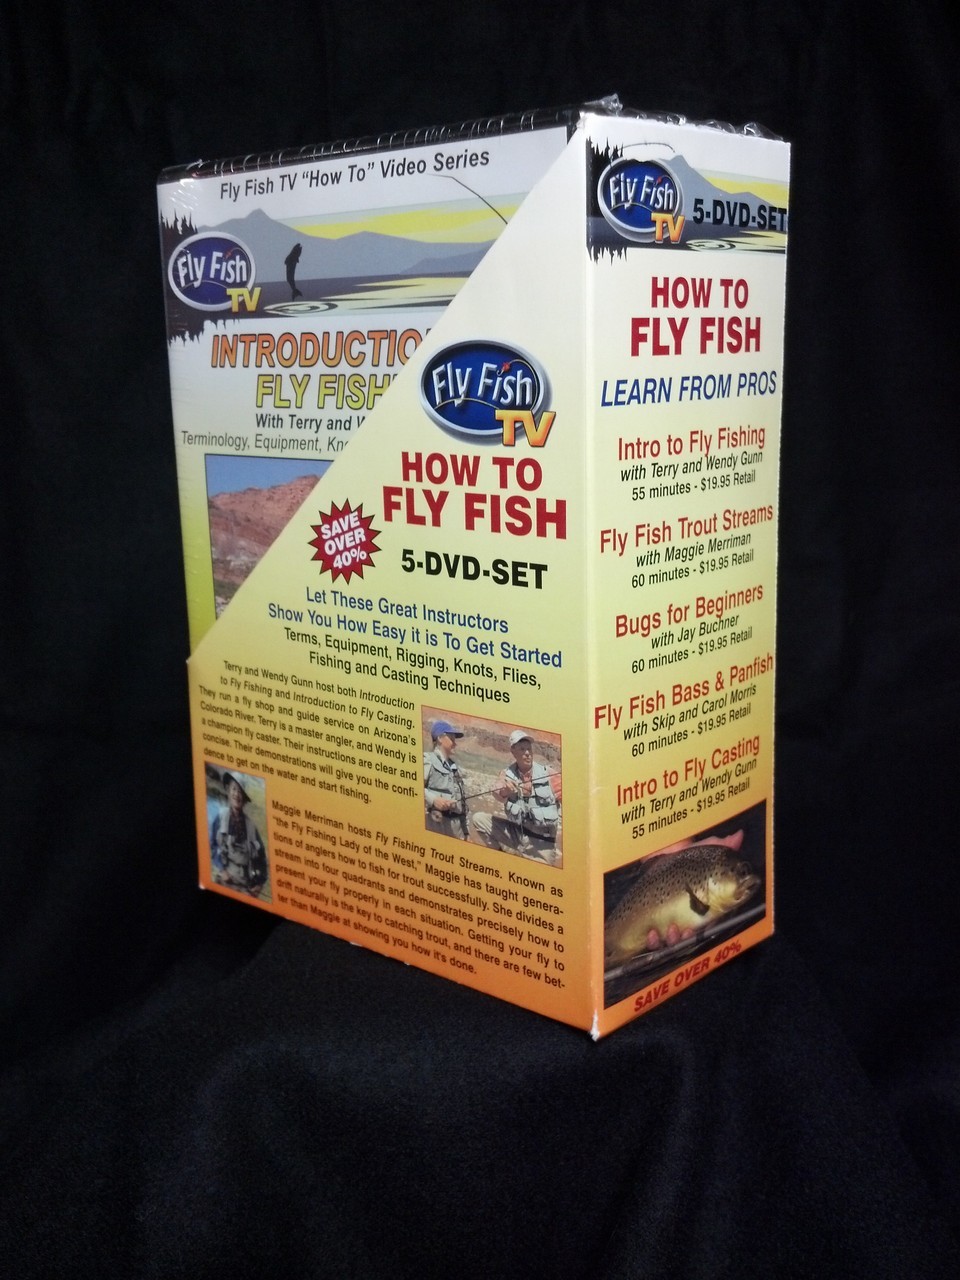 How to Fly Fish 5-DVD-SET - Fly Fish TV